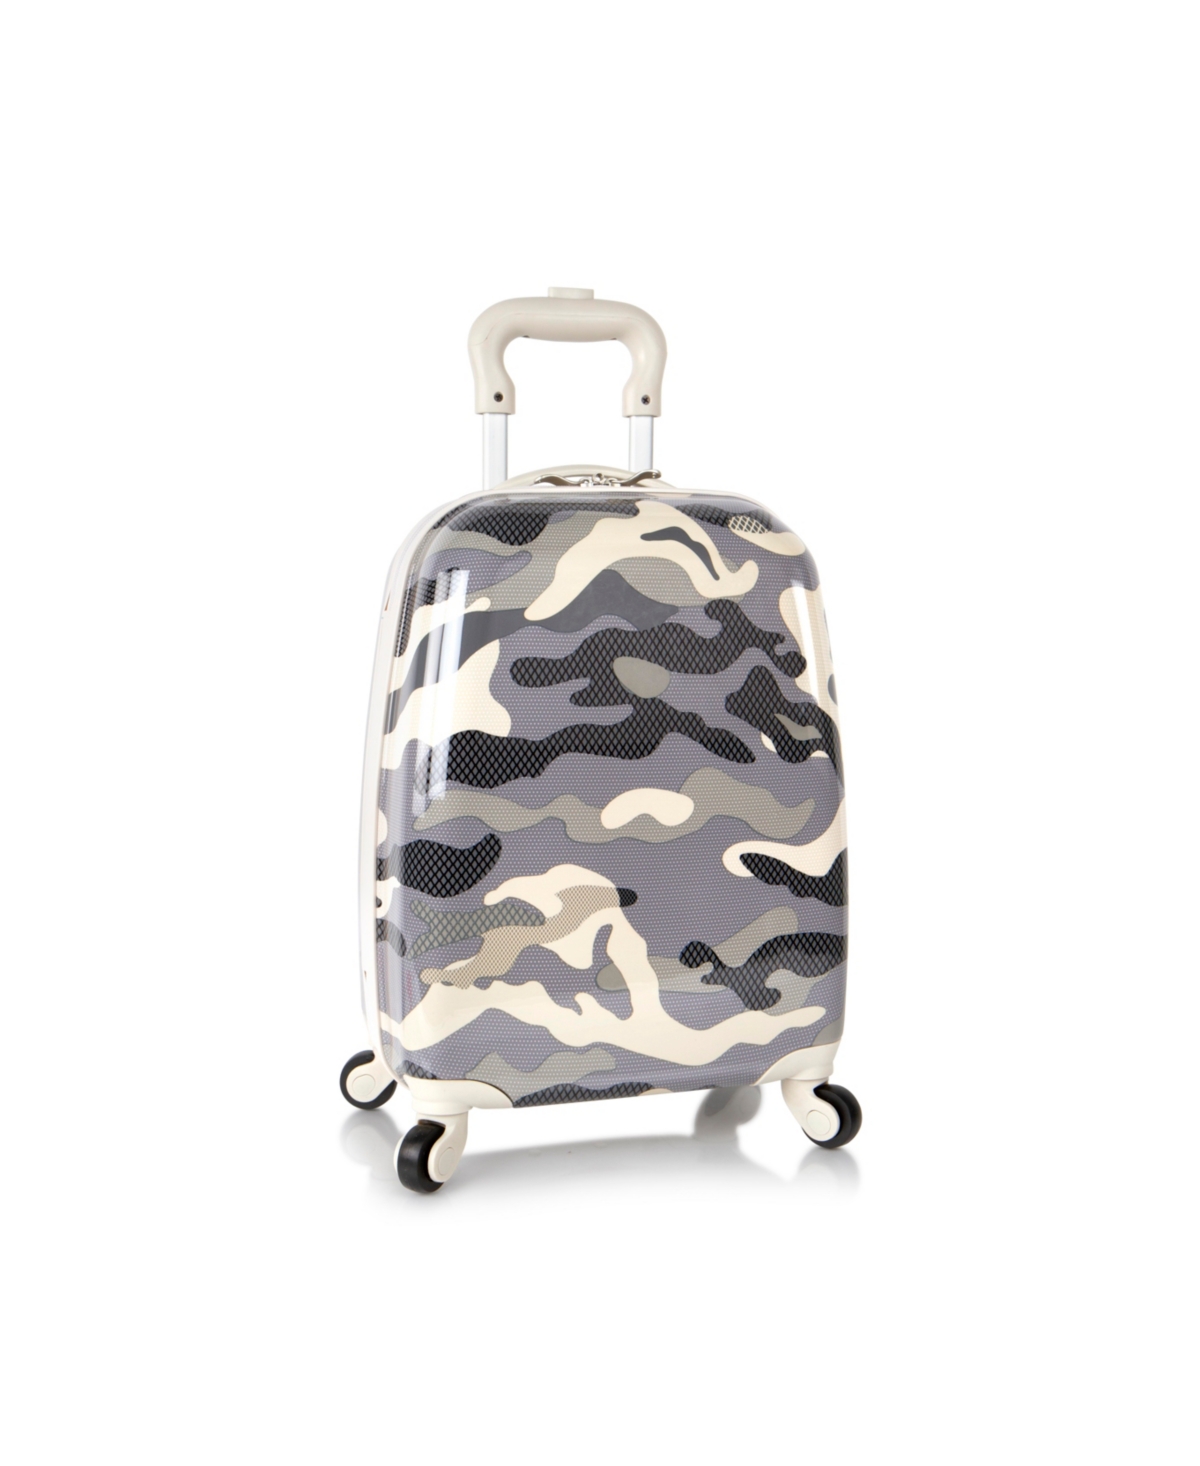 Heys Kids 18" Carry-on Spinner Luggage In Gray Camo